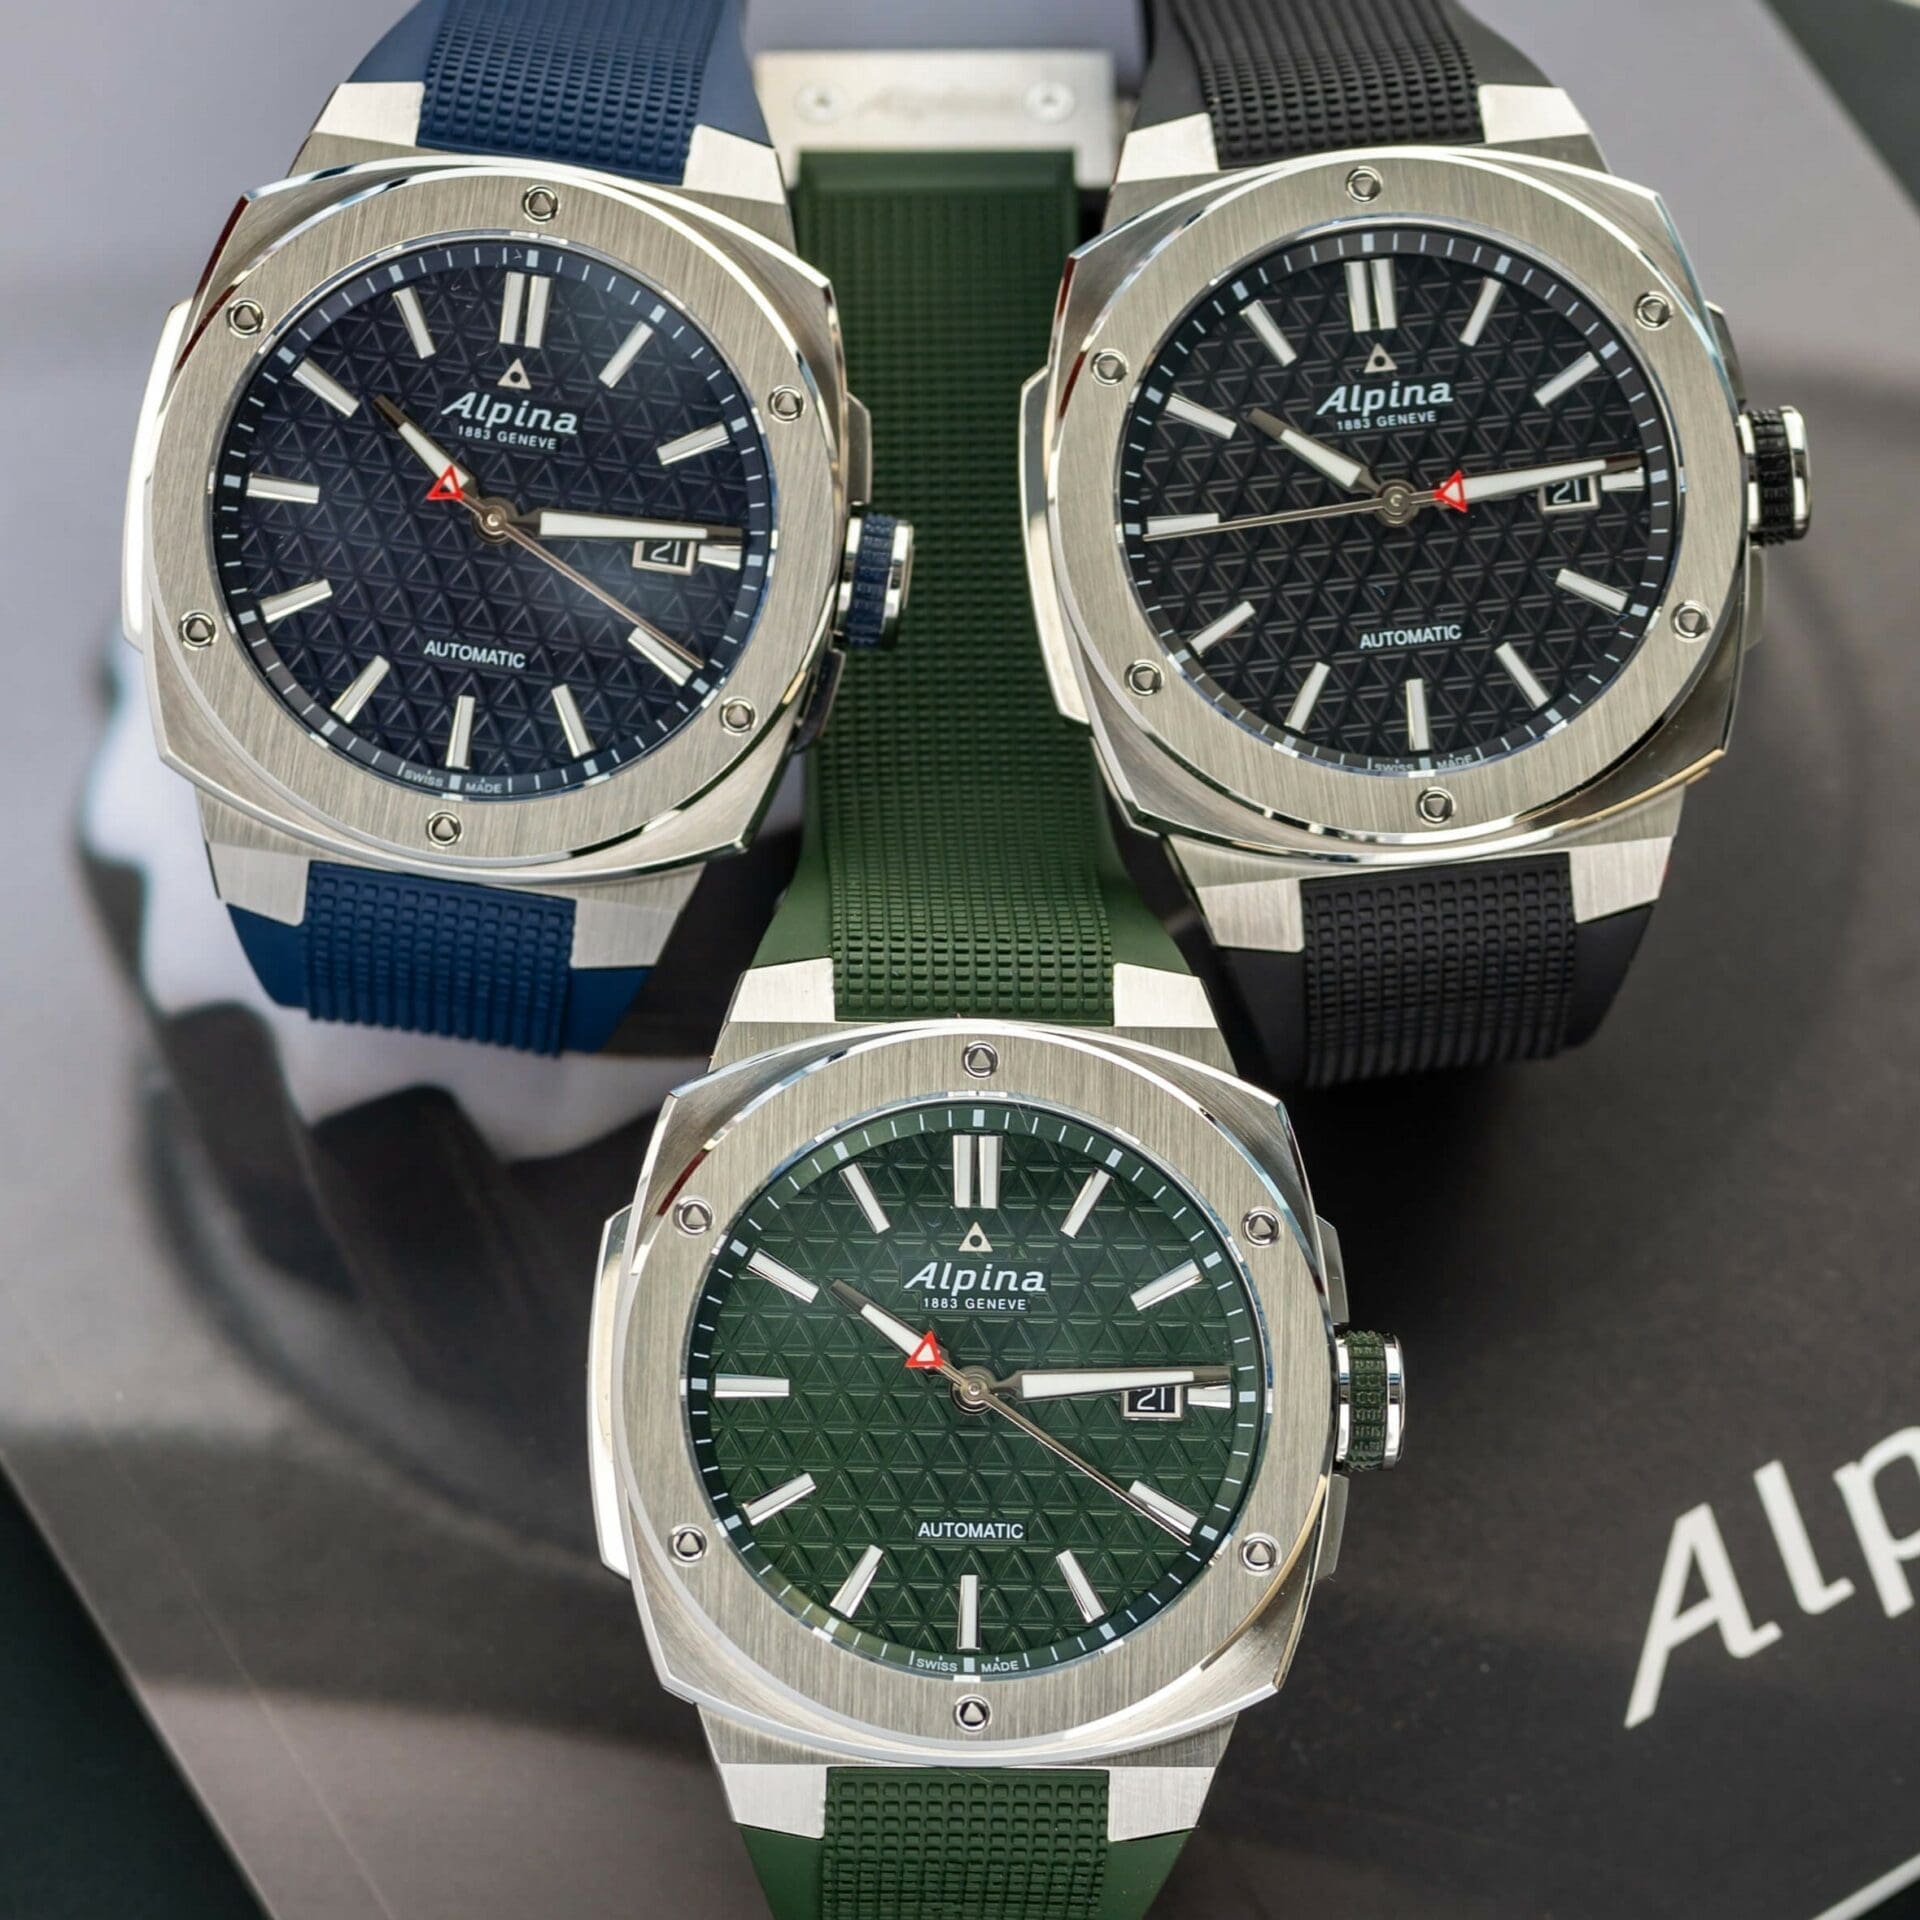 HANDS-ON: Test your limits with the new Alpina Alpiner Extreme Automatic